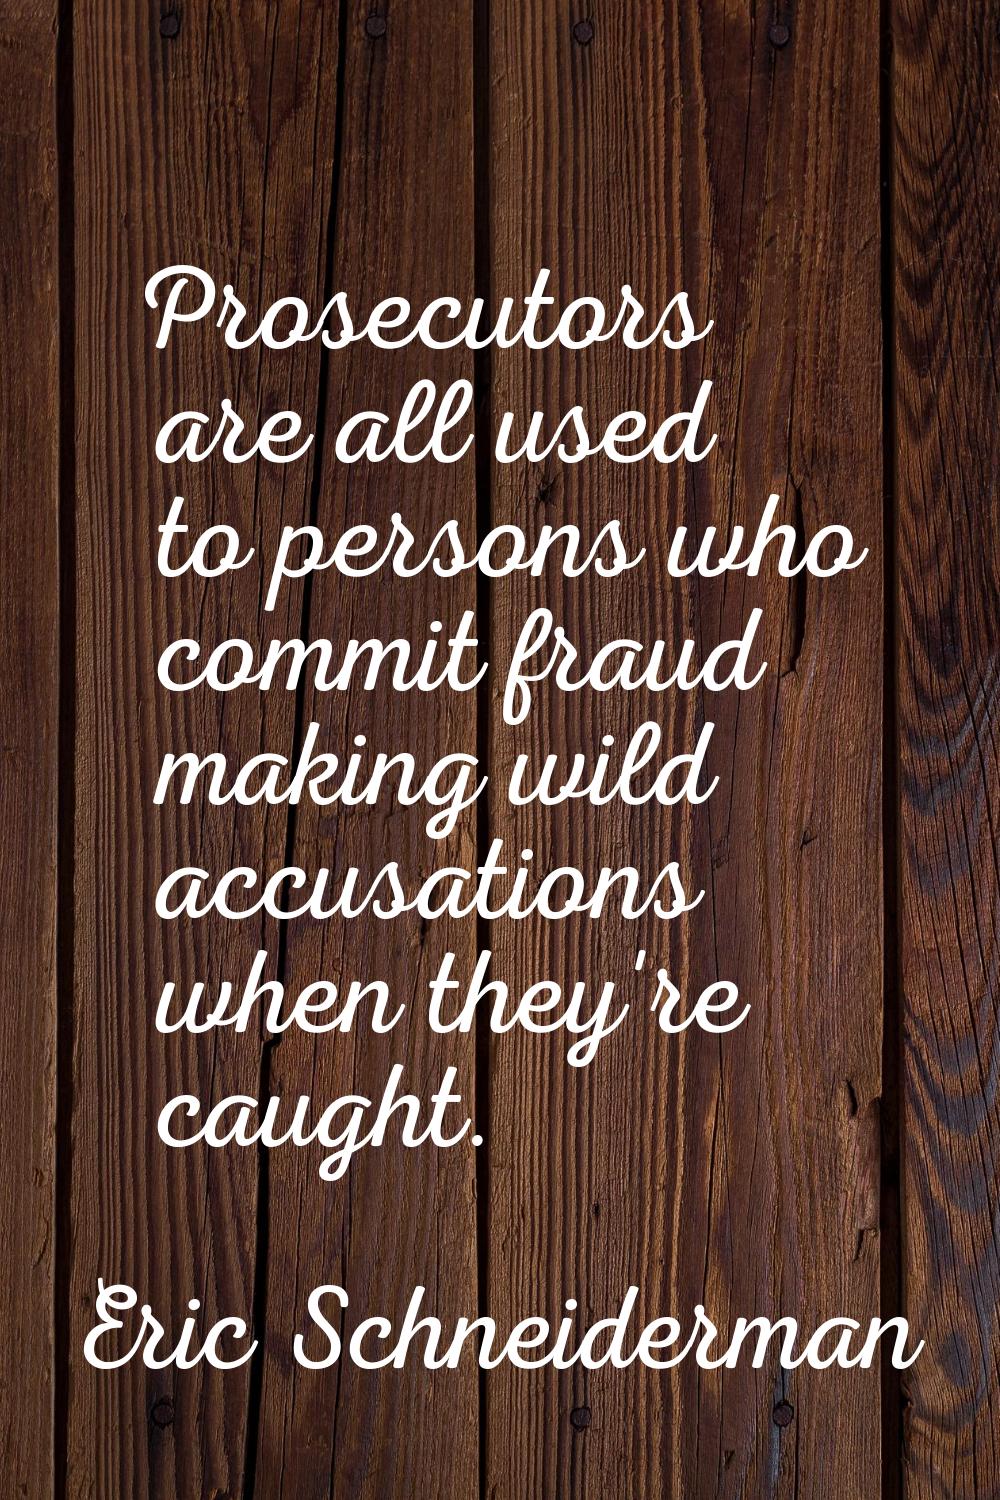 Prosecutors are all used to persons who commit fraud making wild accusations when they're caught.